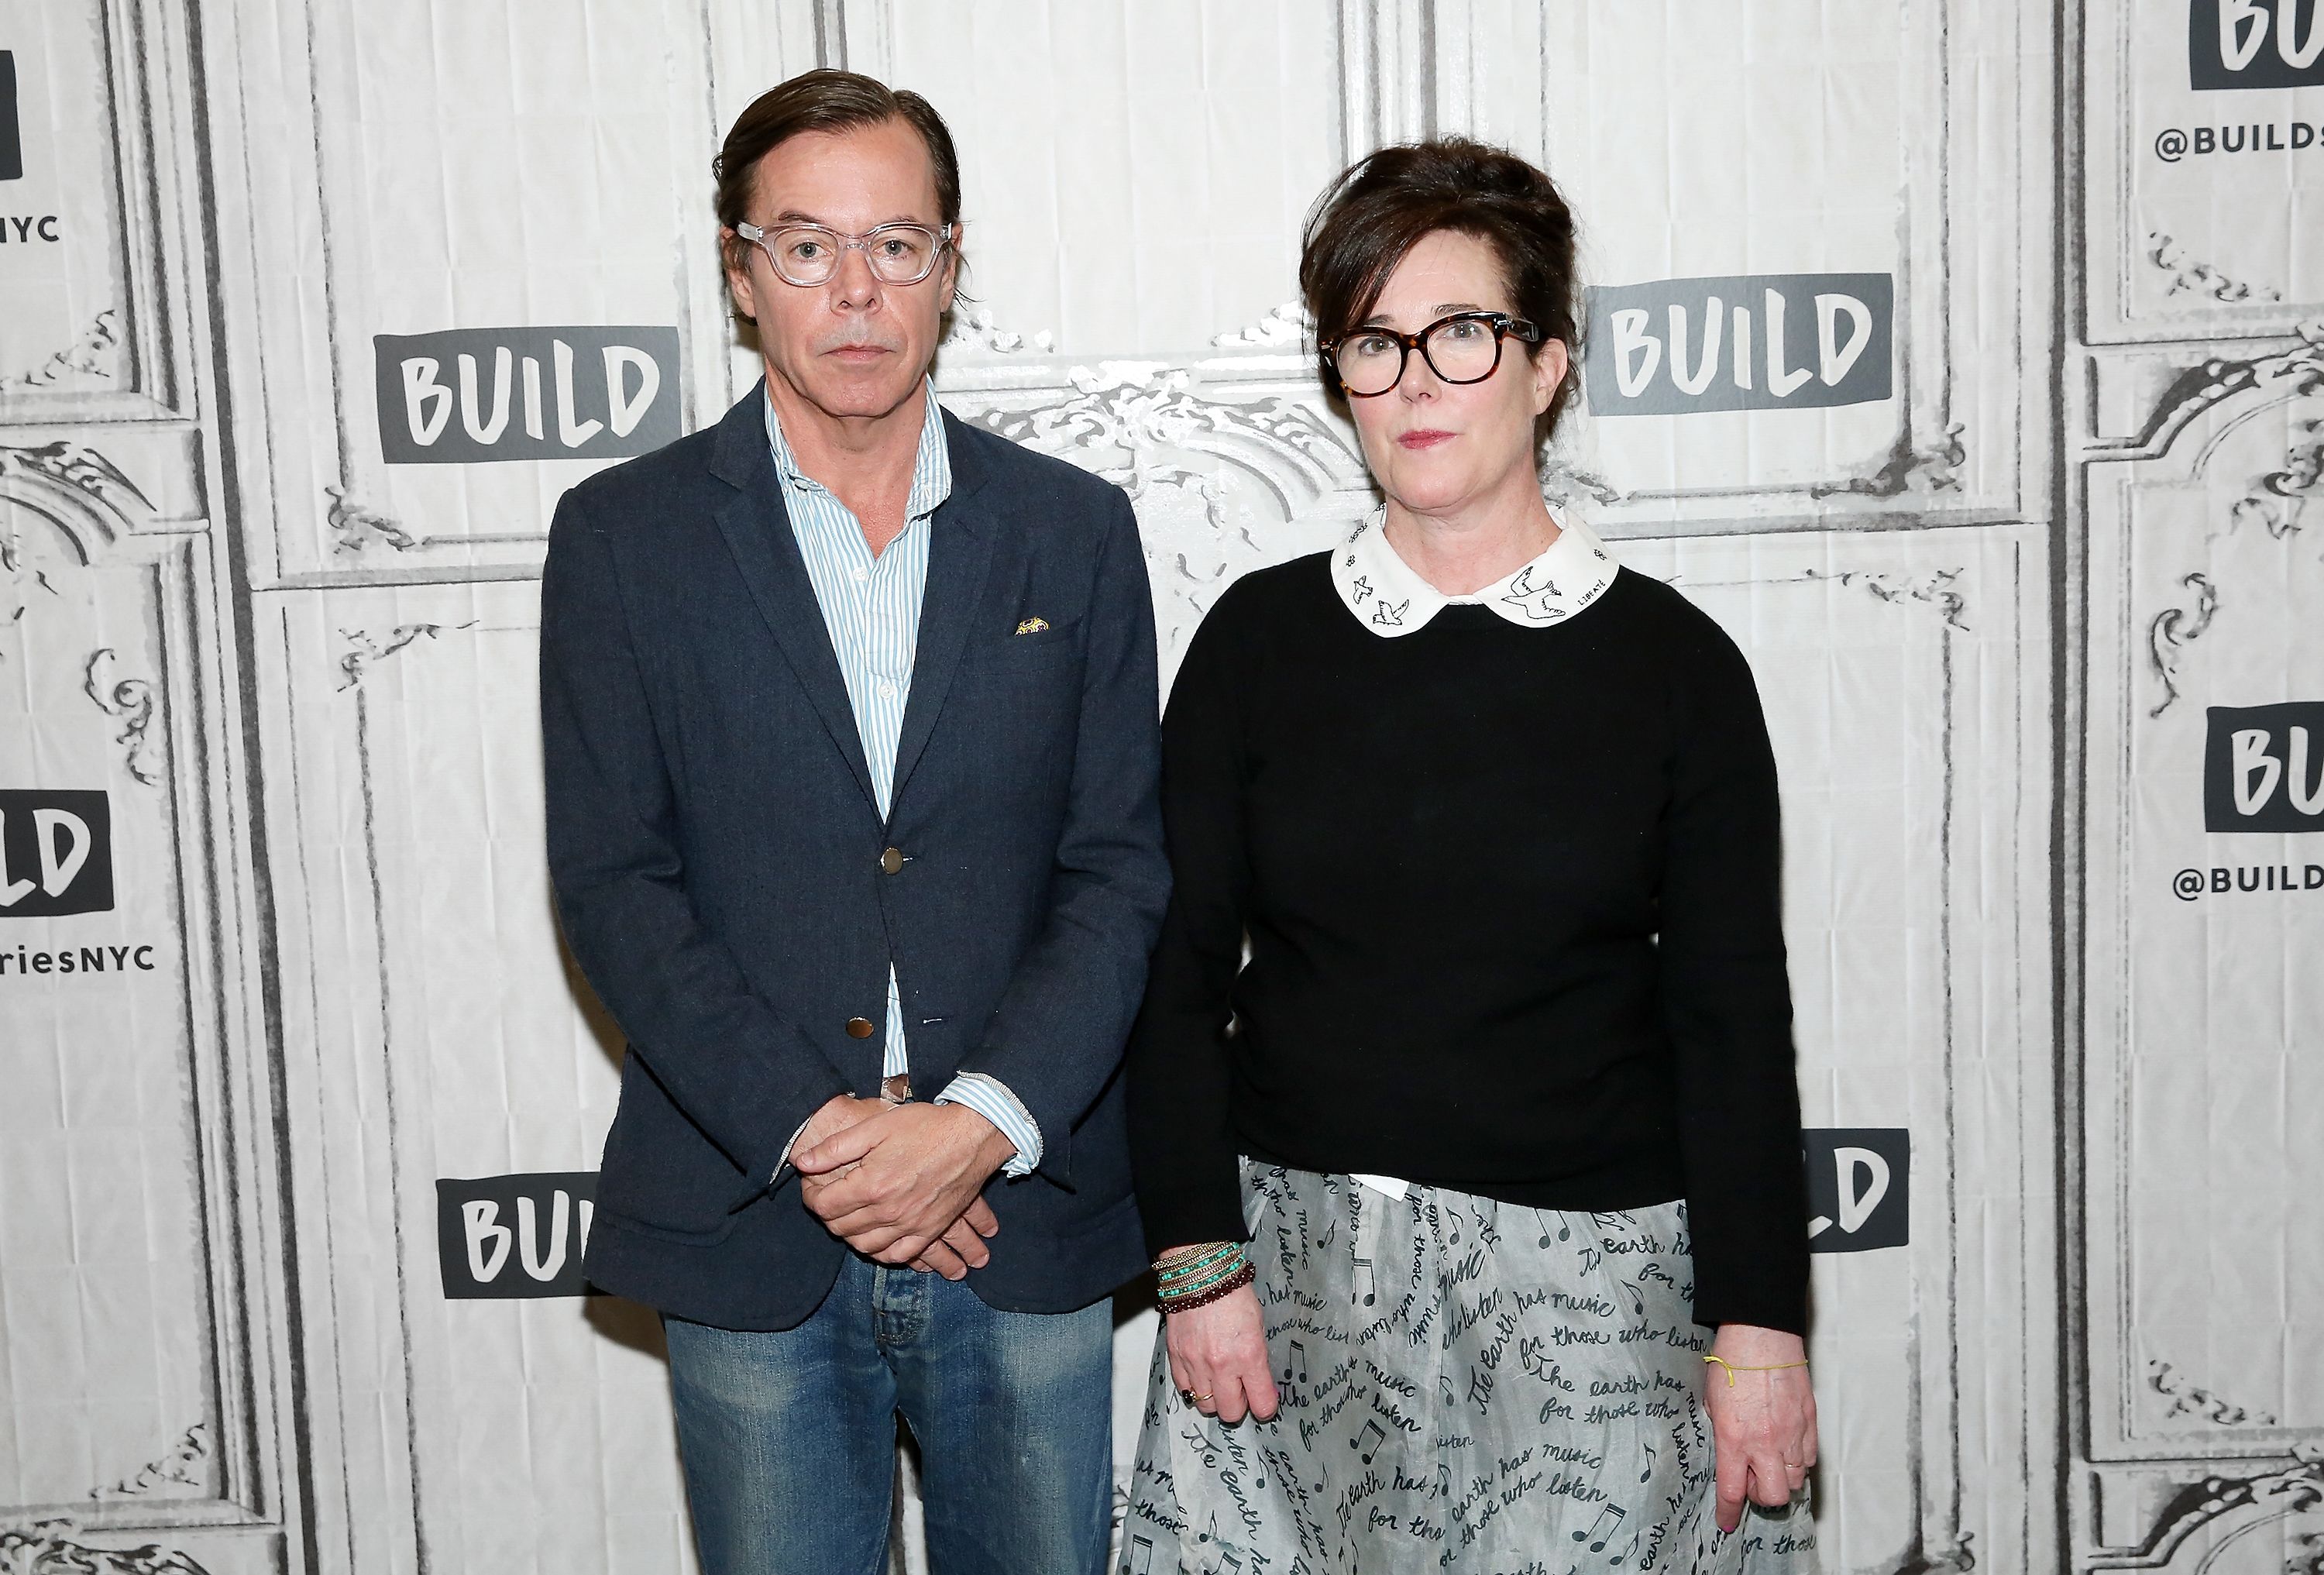 Bangladesh Legeme hylde Andy Spade's full statement on wife Kate Spade's suicide | CNN